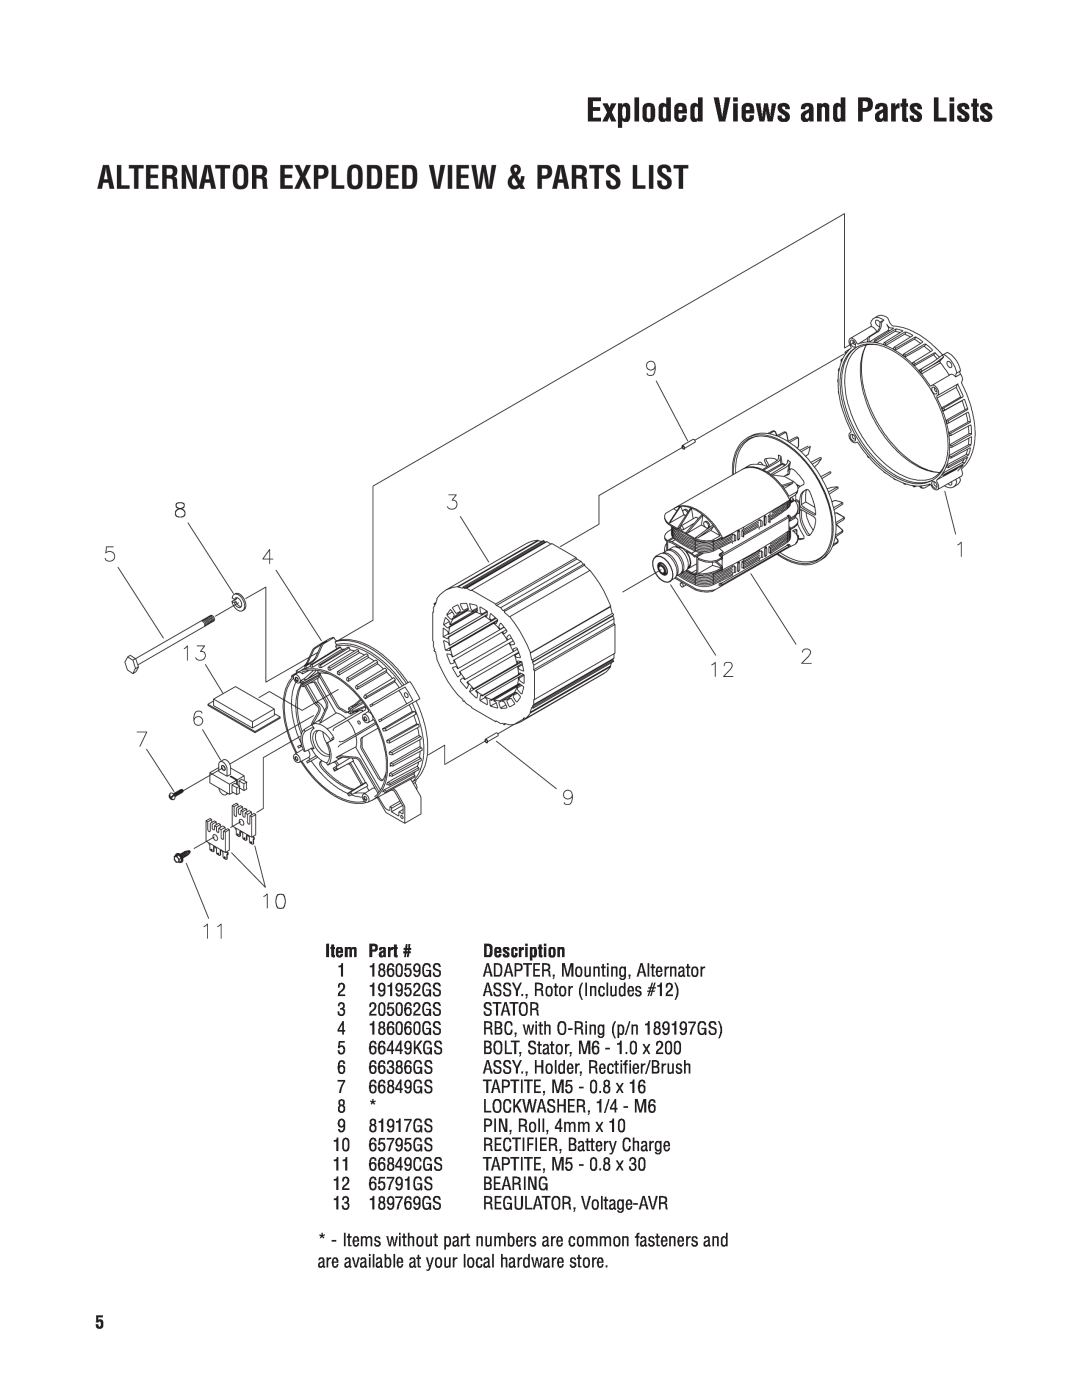 Briggs & Stratton PRO10000 030383 manual Alternator Exploded View & Parts List, Item Part #, Exploded Views and Parts Lists 